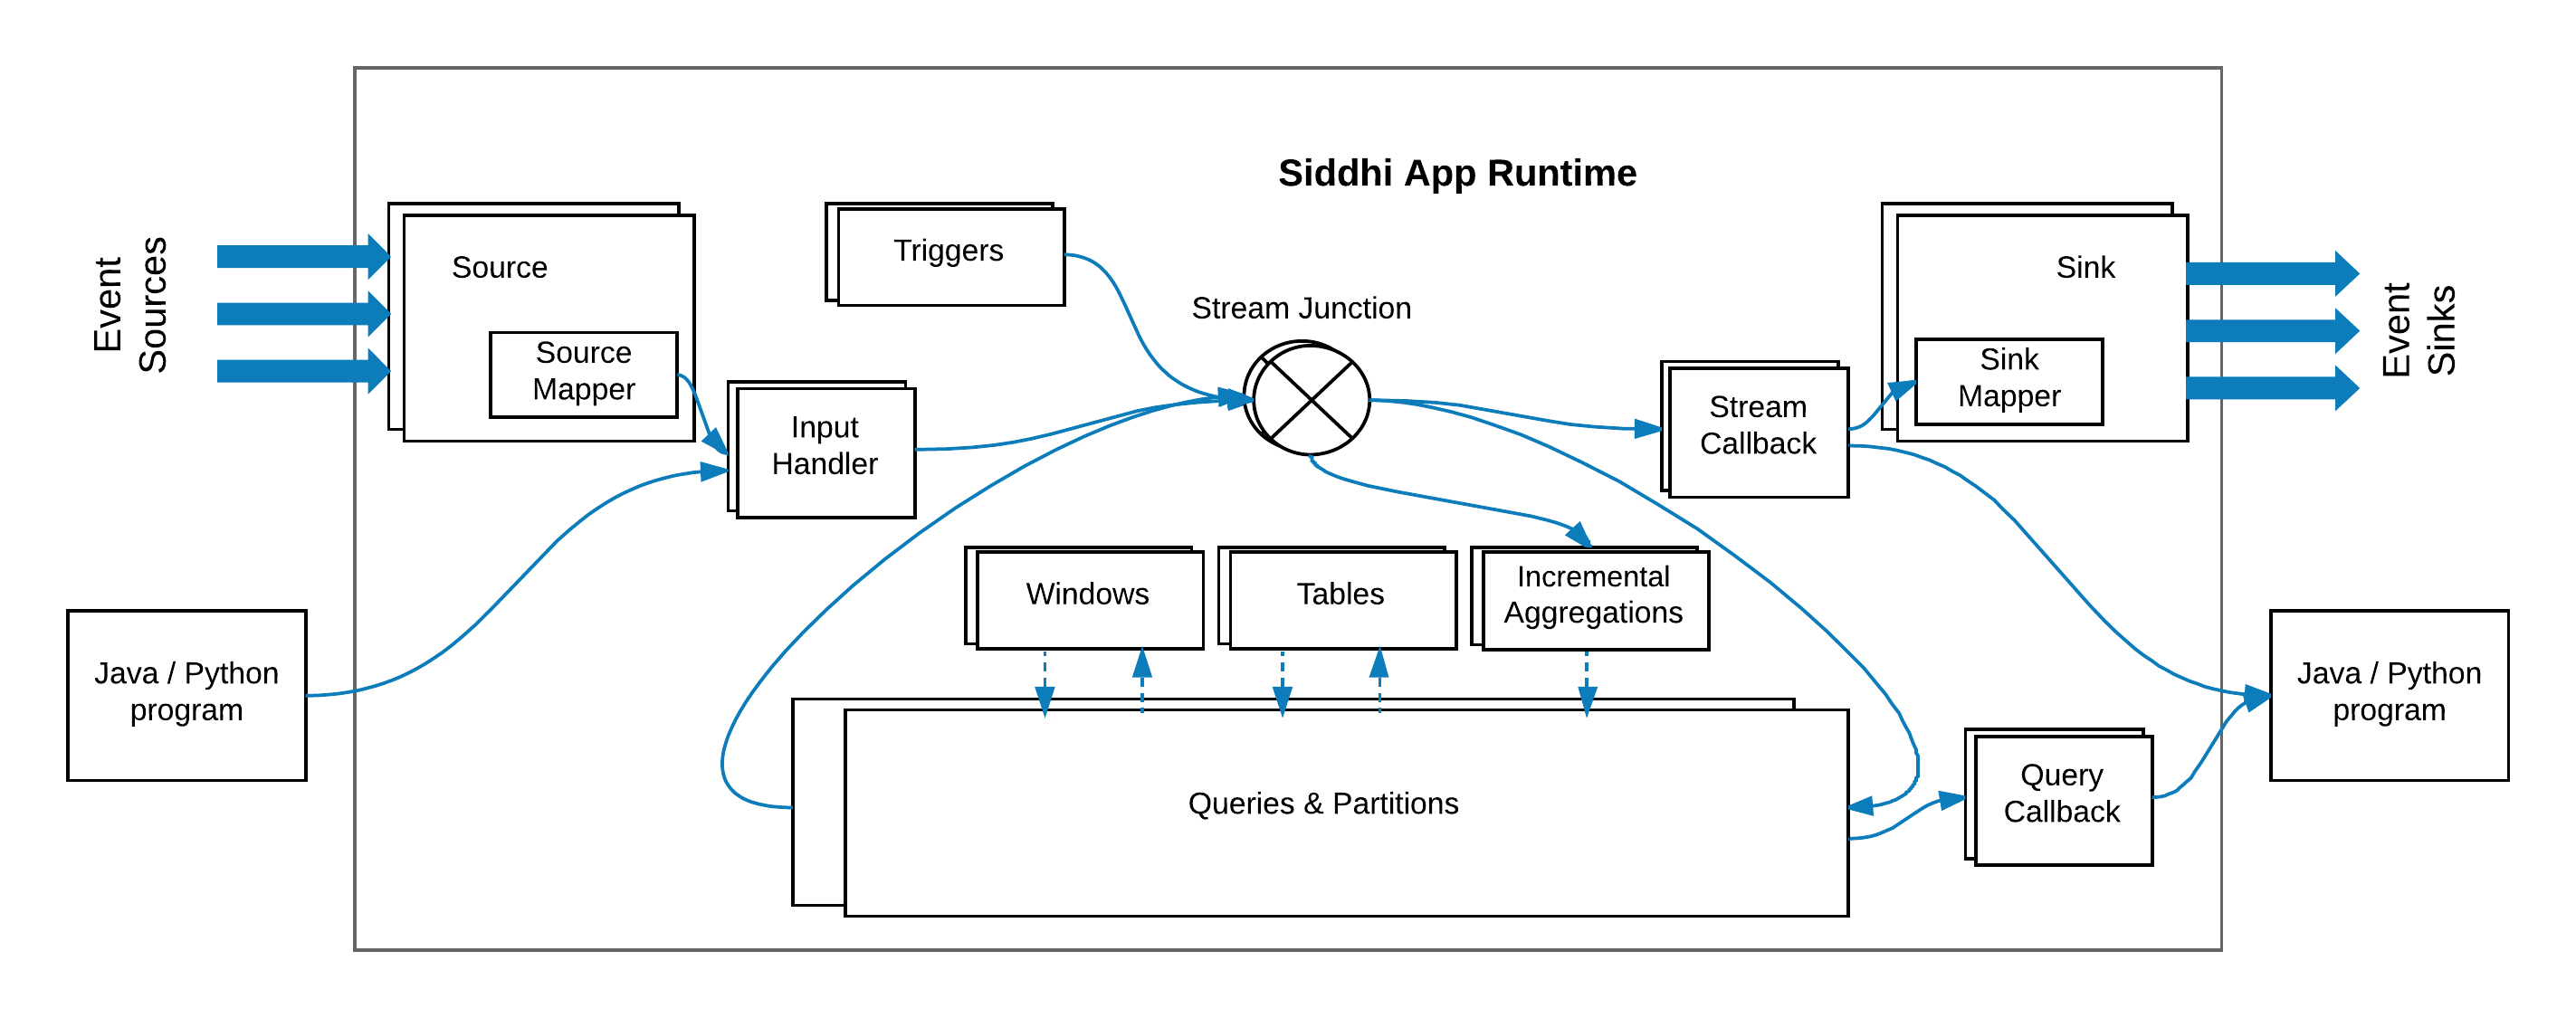 Execution Flow in Siddhi App